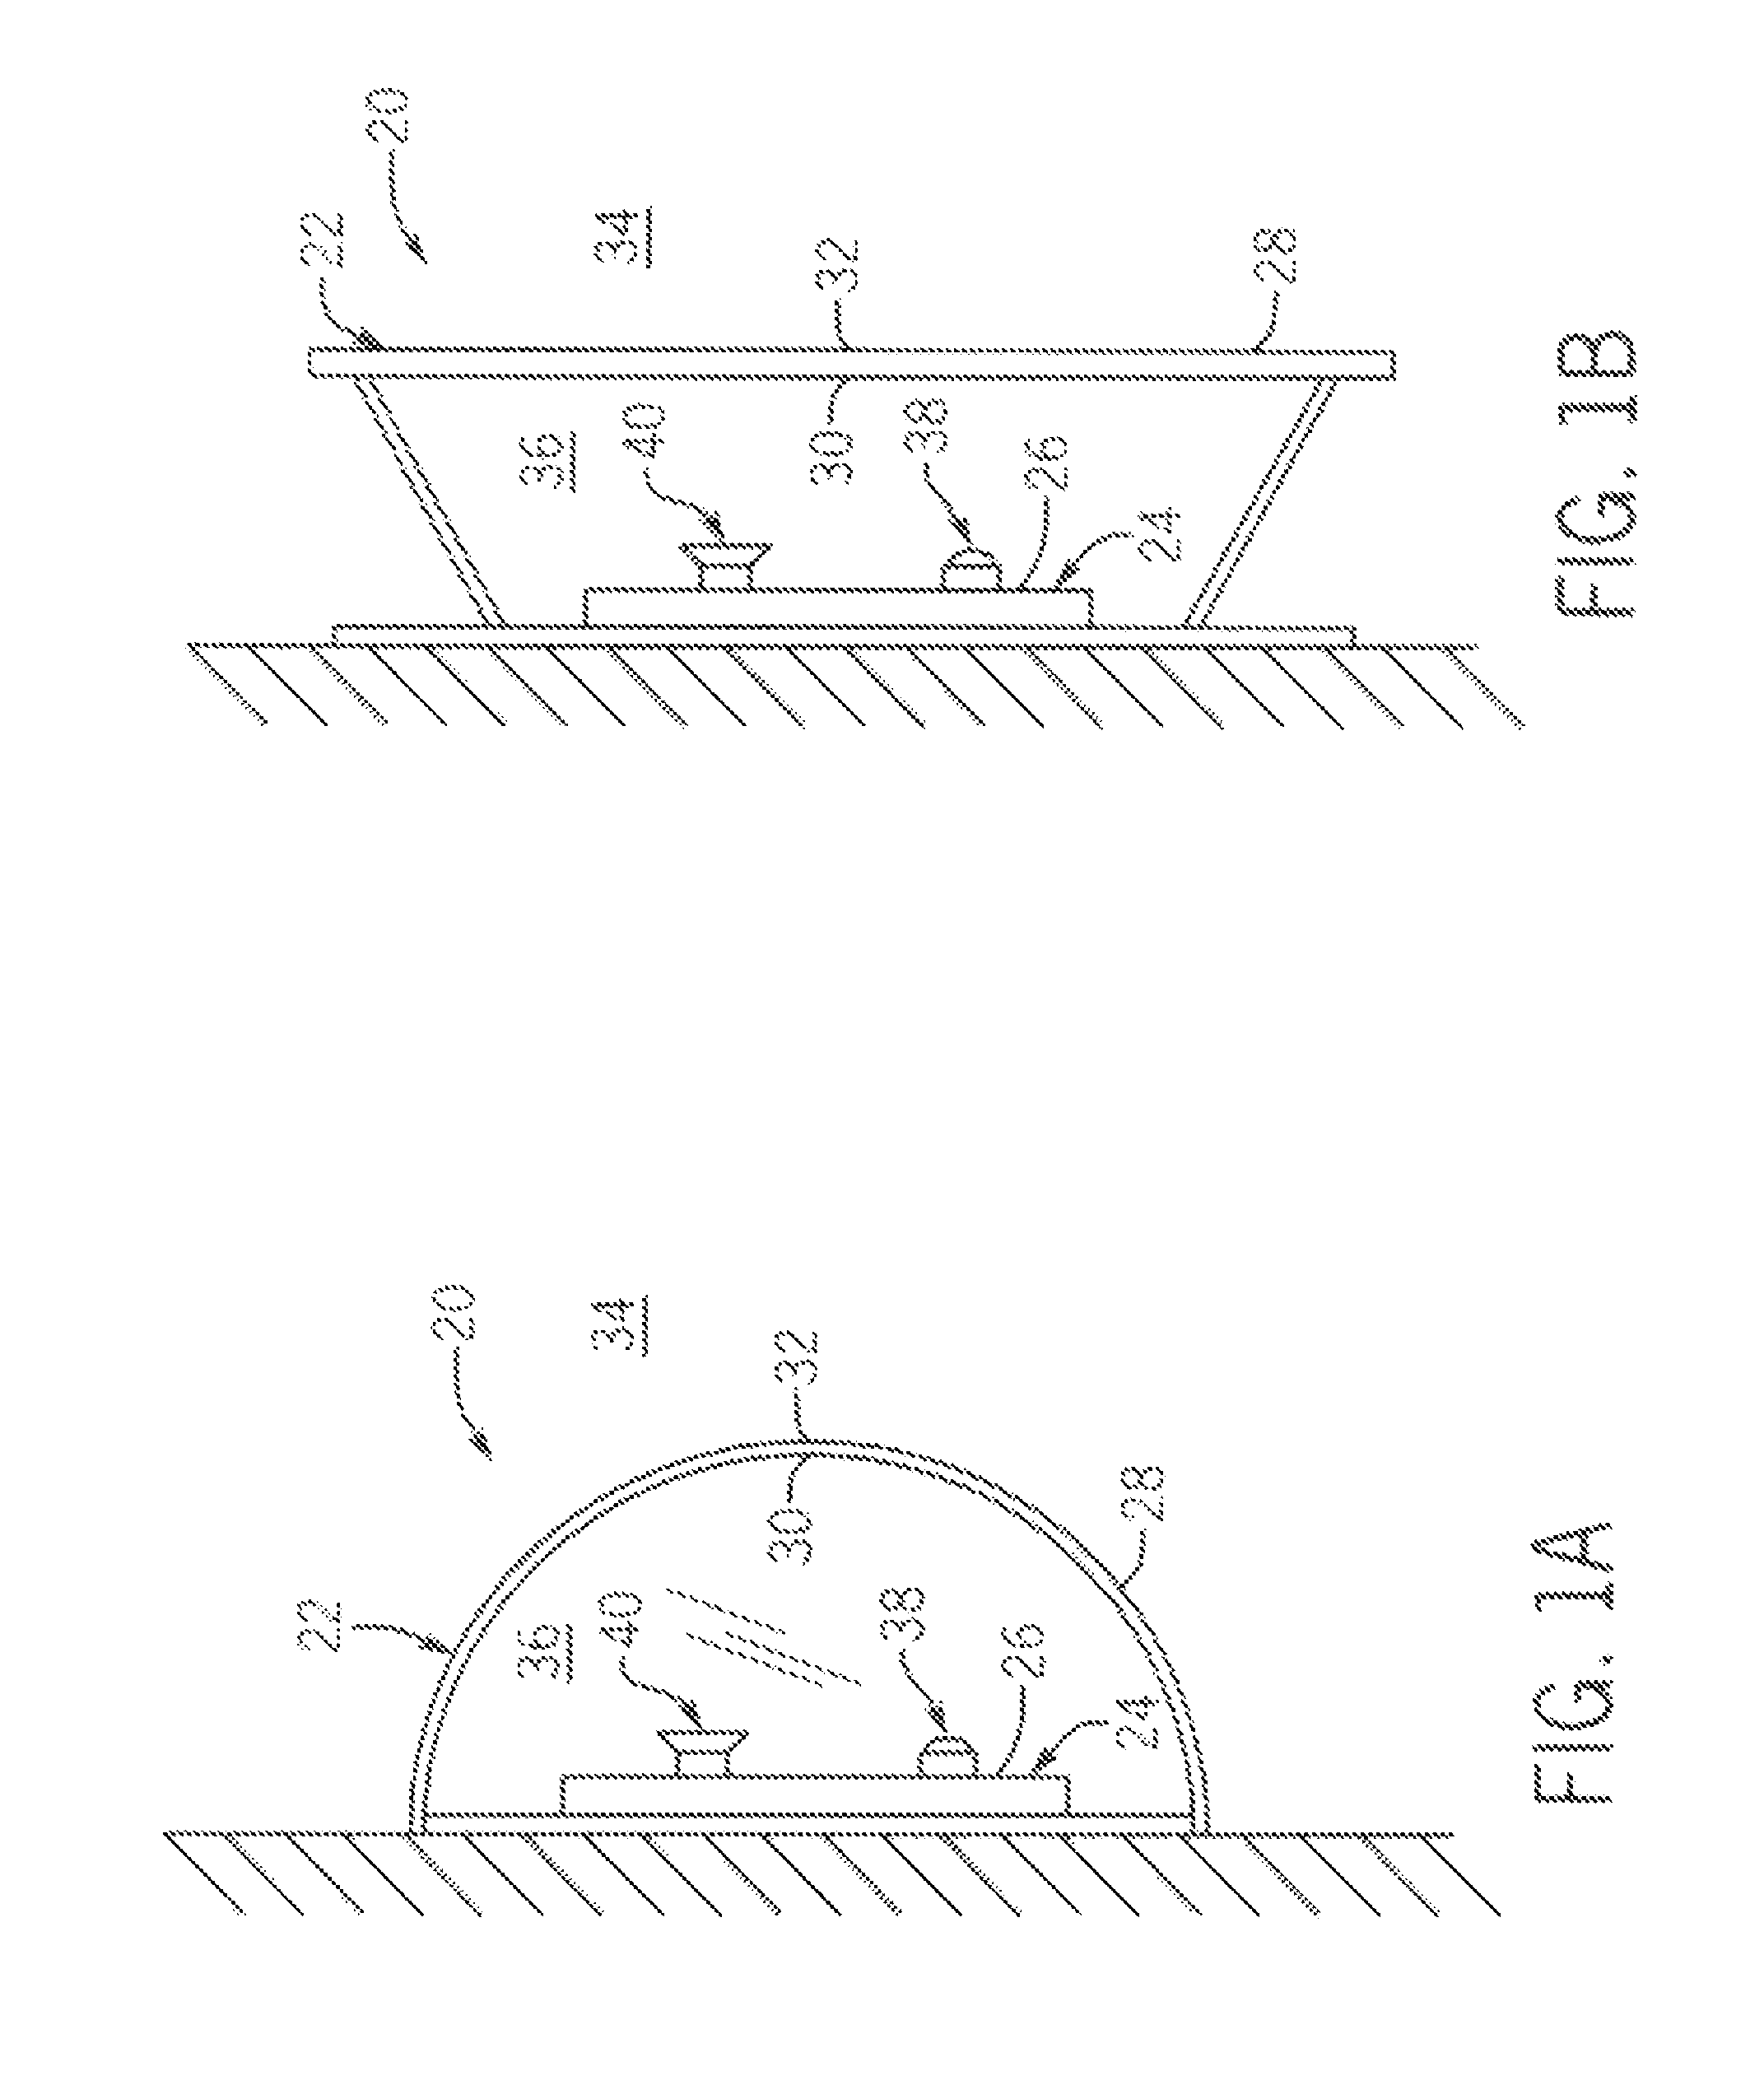 Luminous flux depreciation notification system for light fixtures incorporating light emitting diode sources